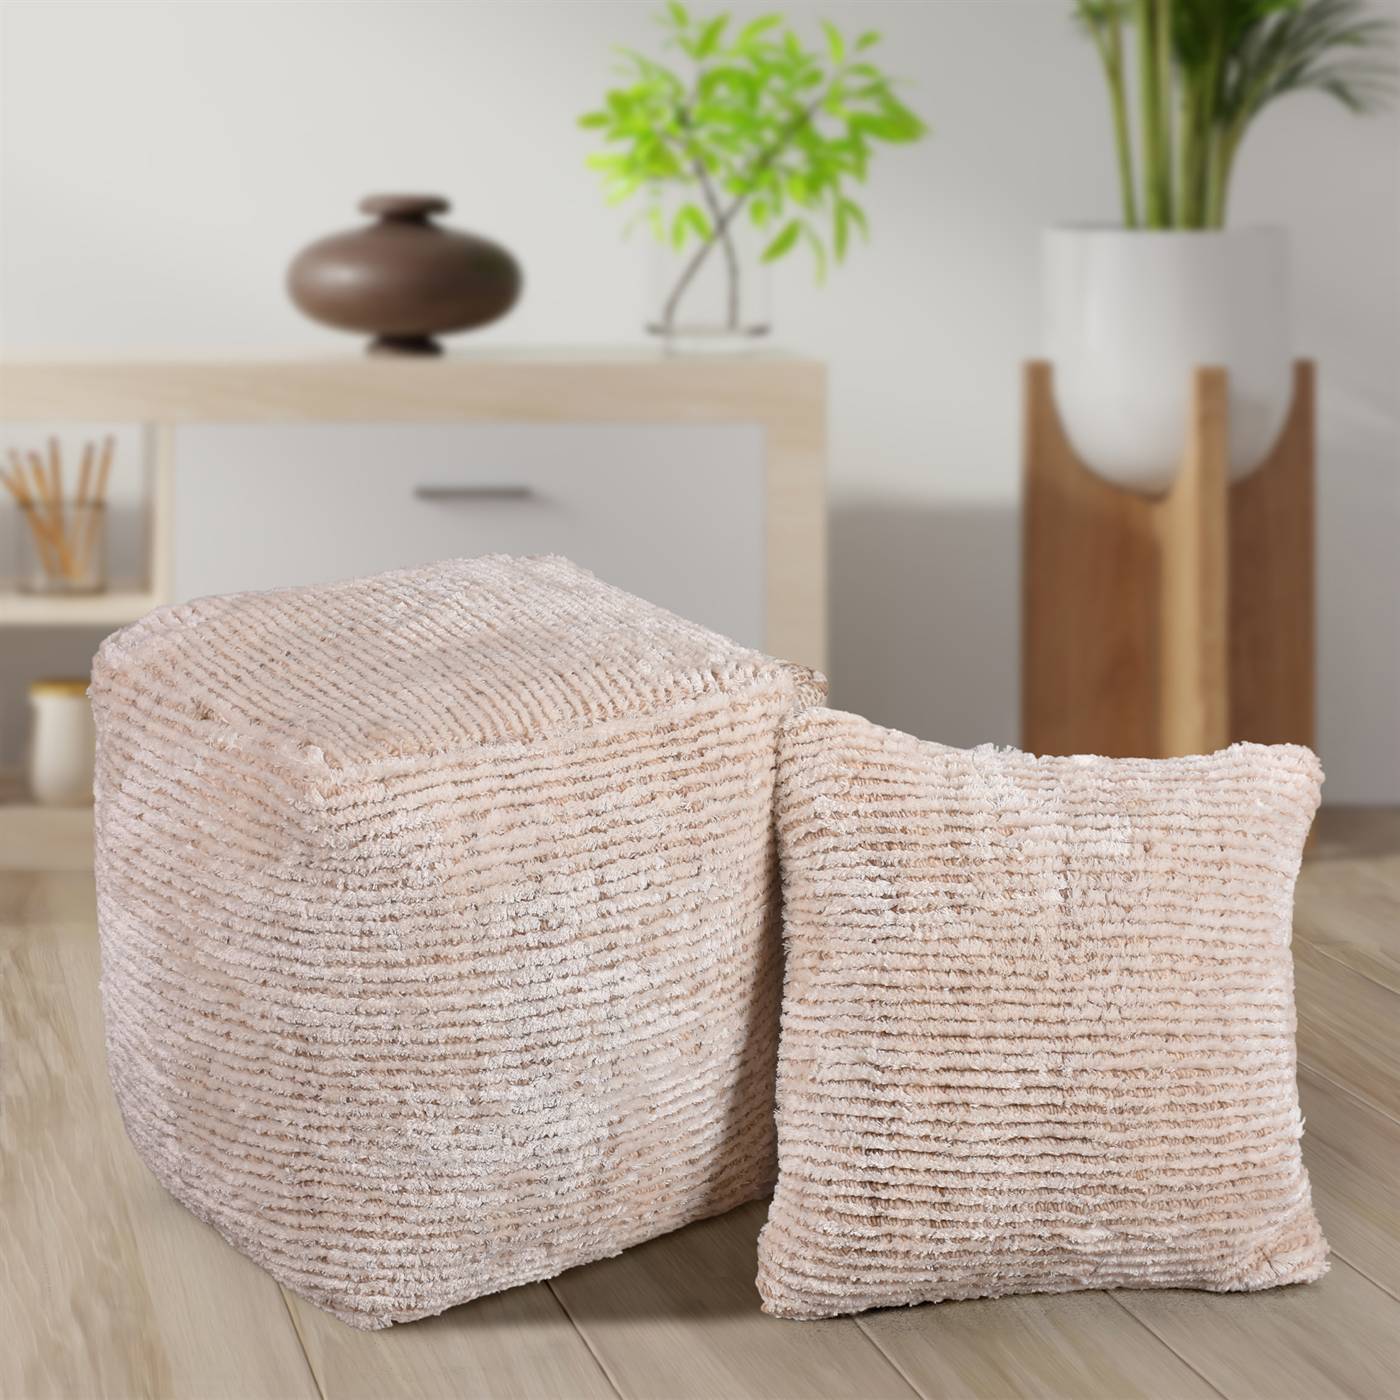 Bony Pouf, 40x40x40 cm, Natural White, Viscose, Wool, Hand Woven, Handwoven, Cut And Loop